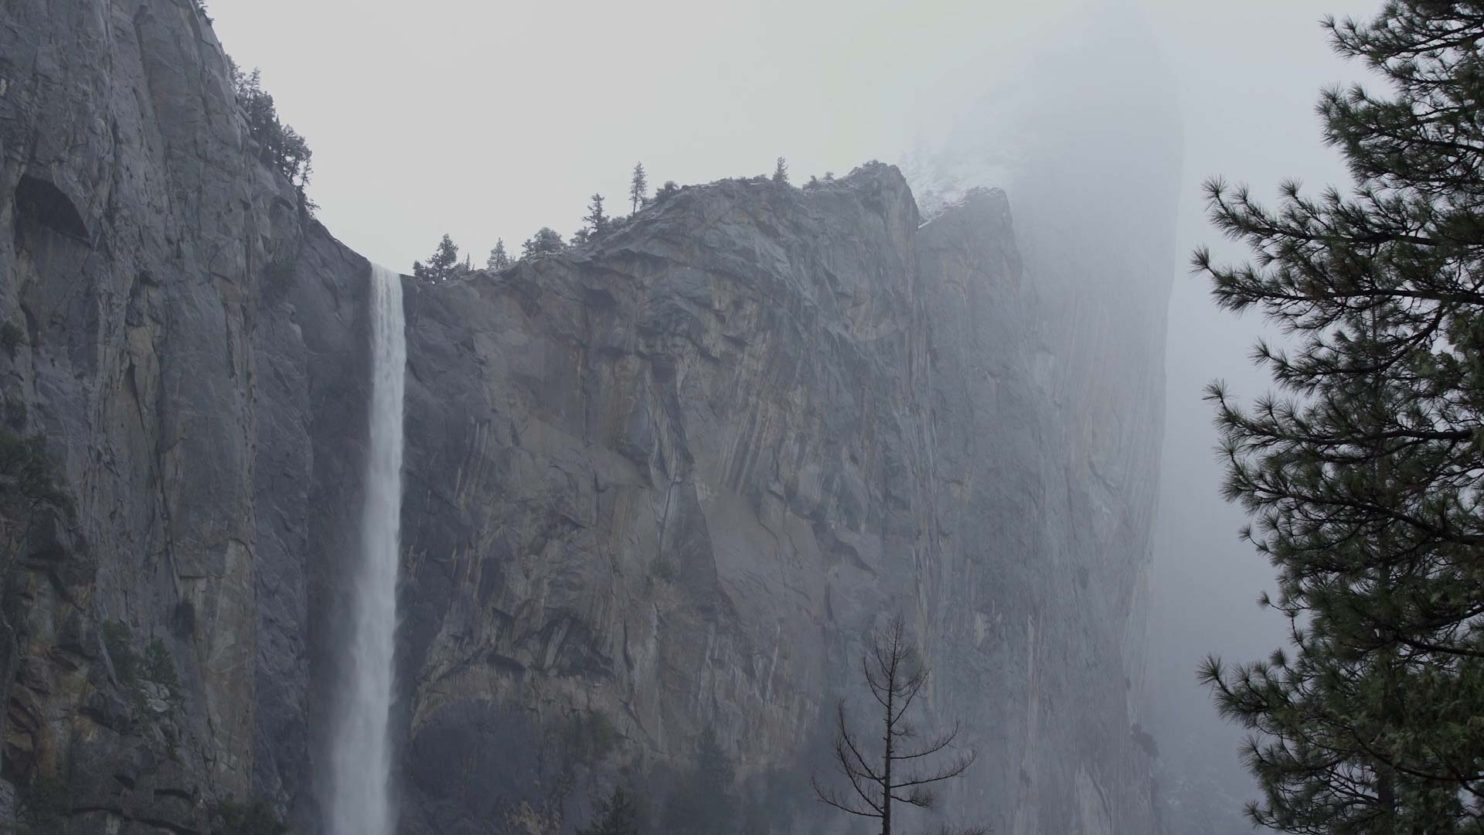 A video still from a recent video project - this image shows a waterfall at yosemite national park